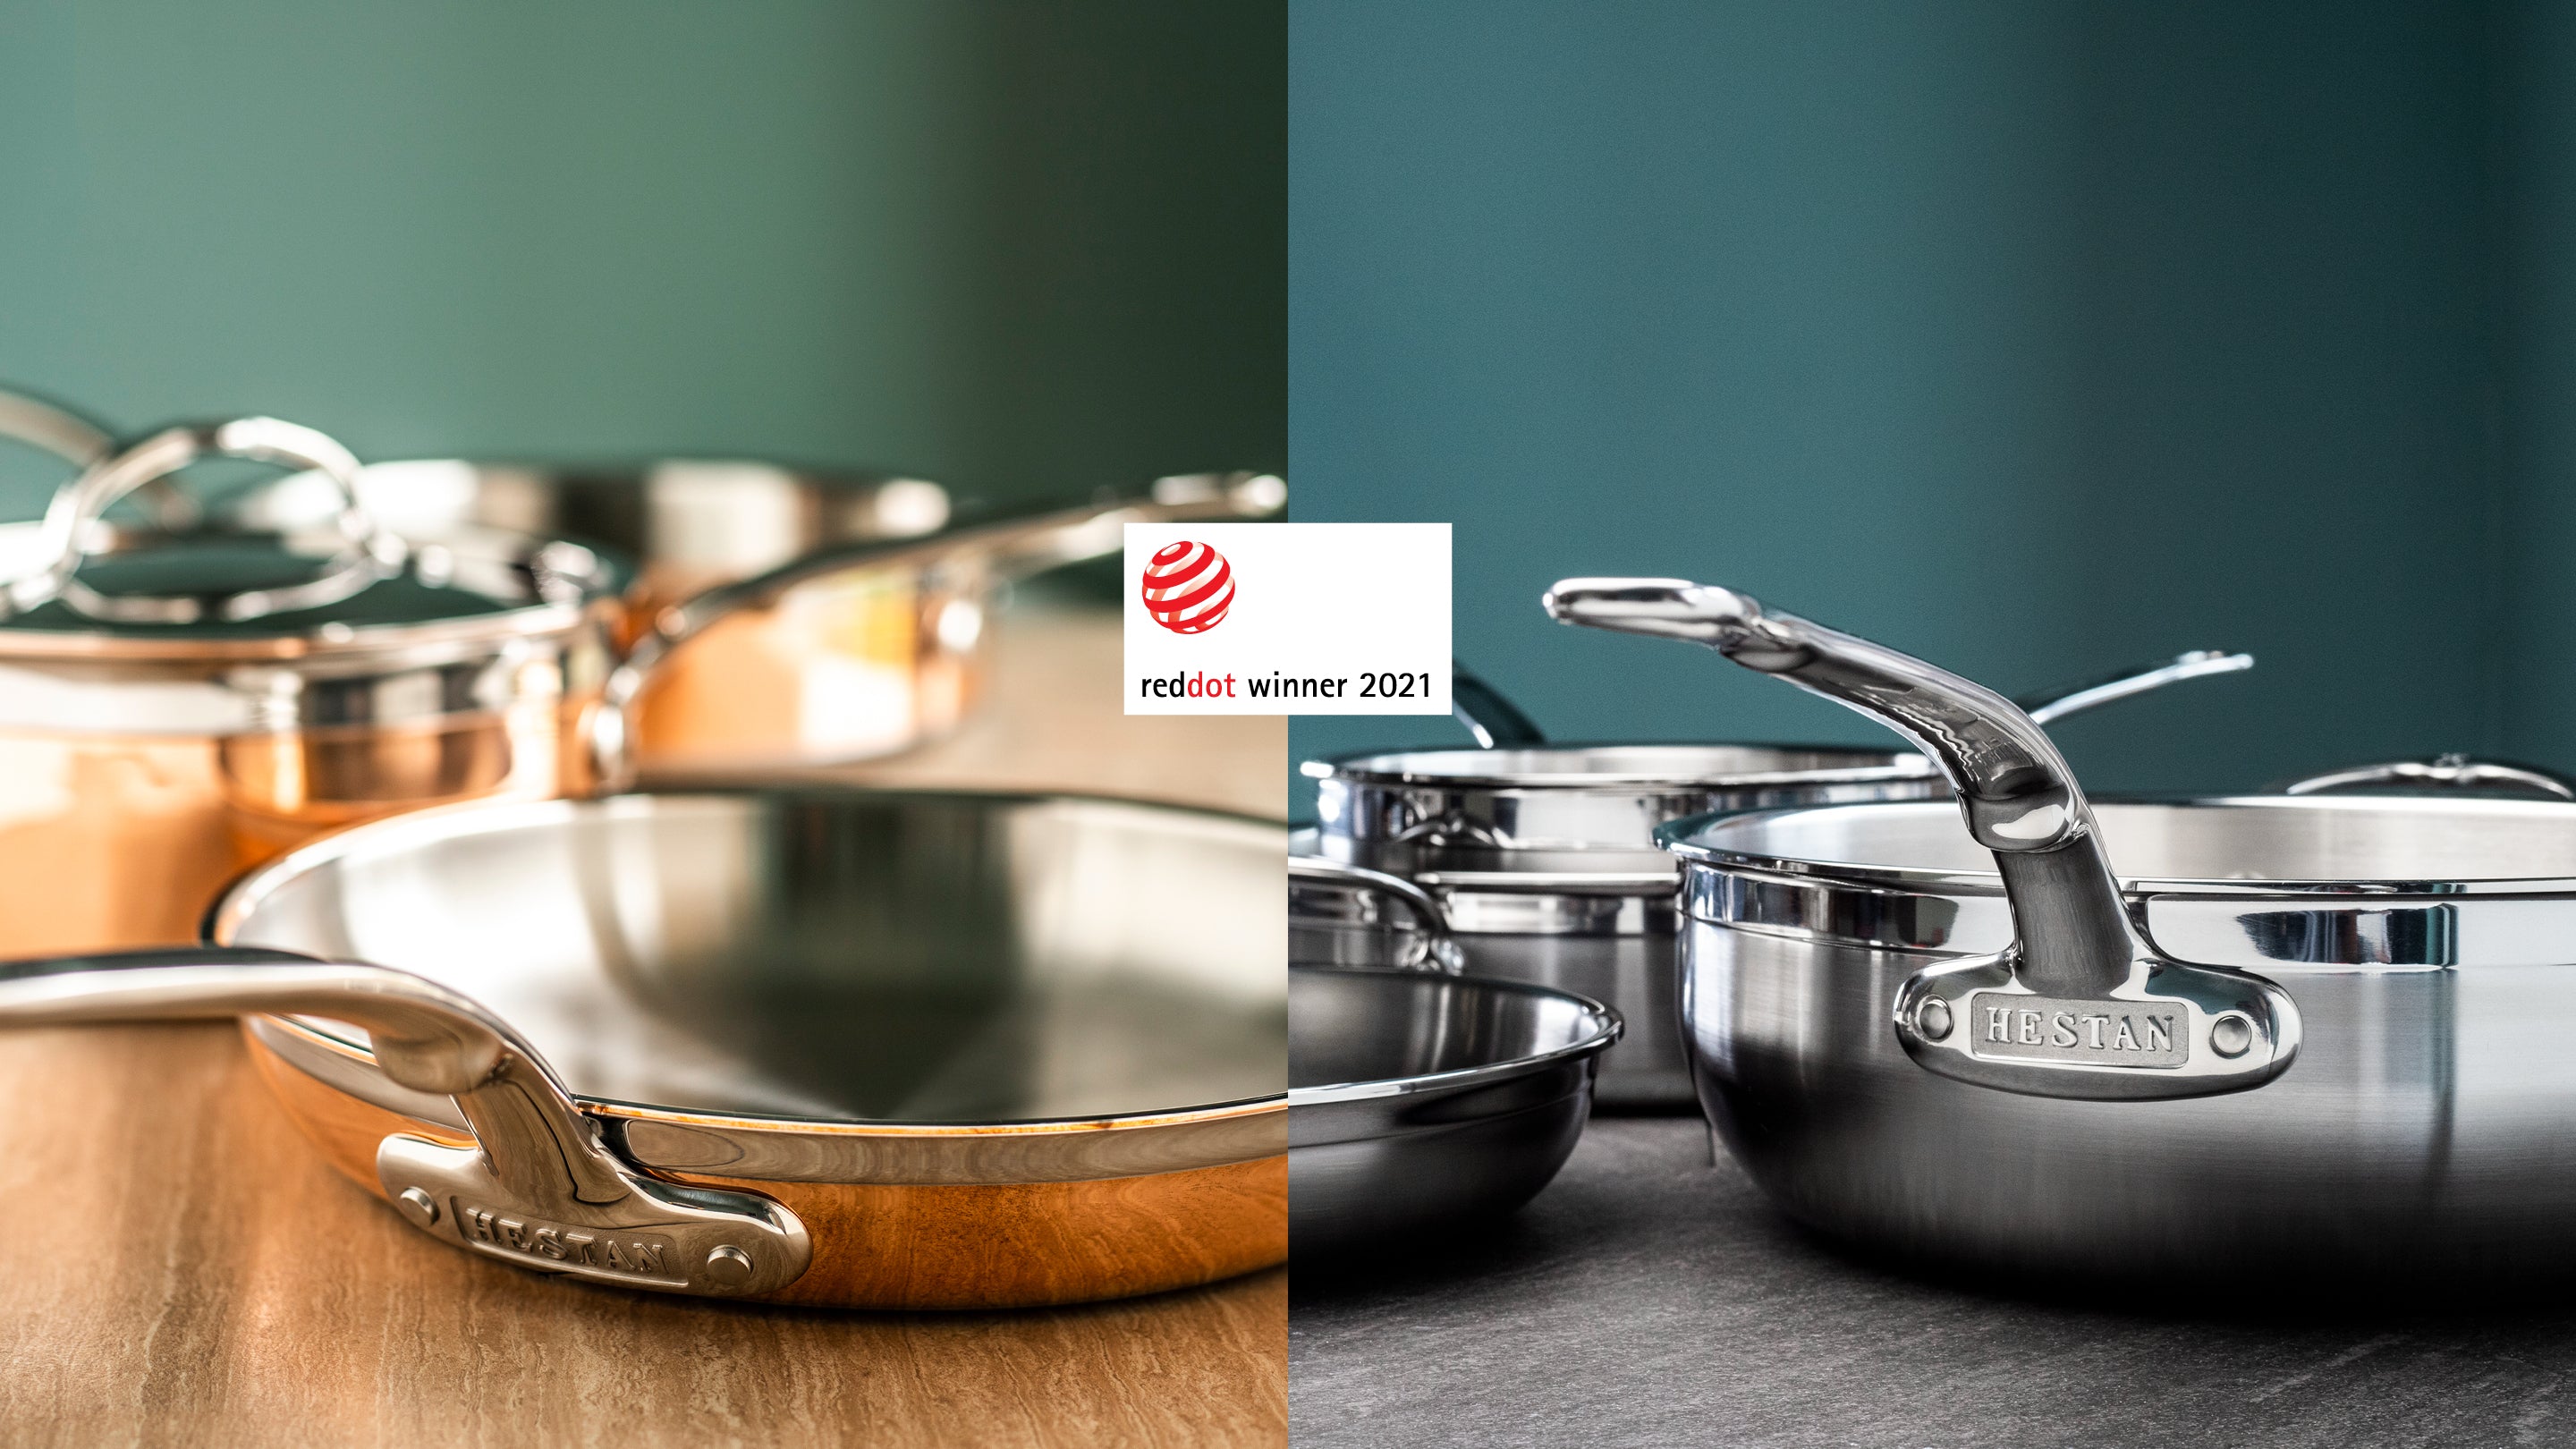 ProBond featured in Food Network's 5 Best Stainless Steel